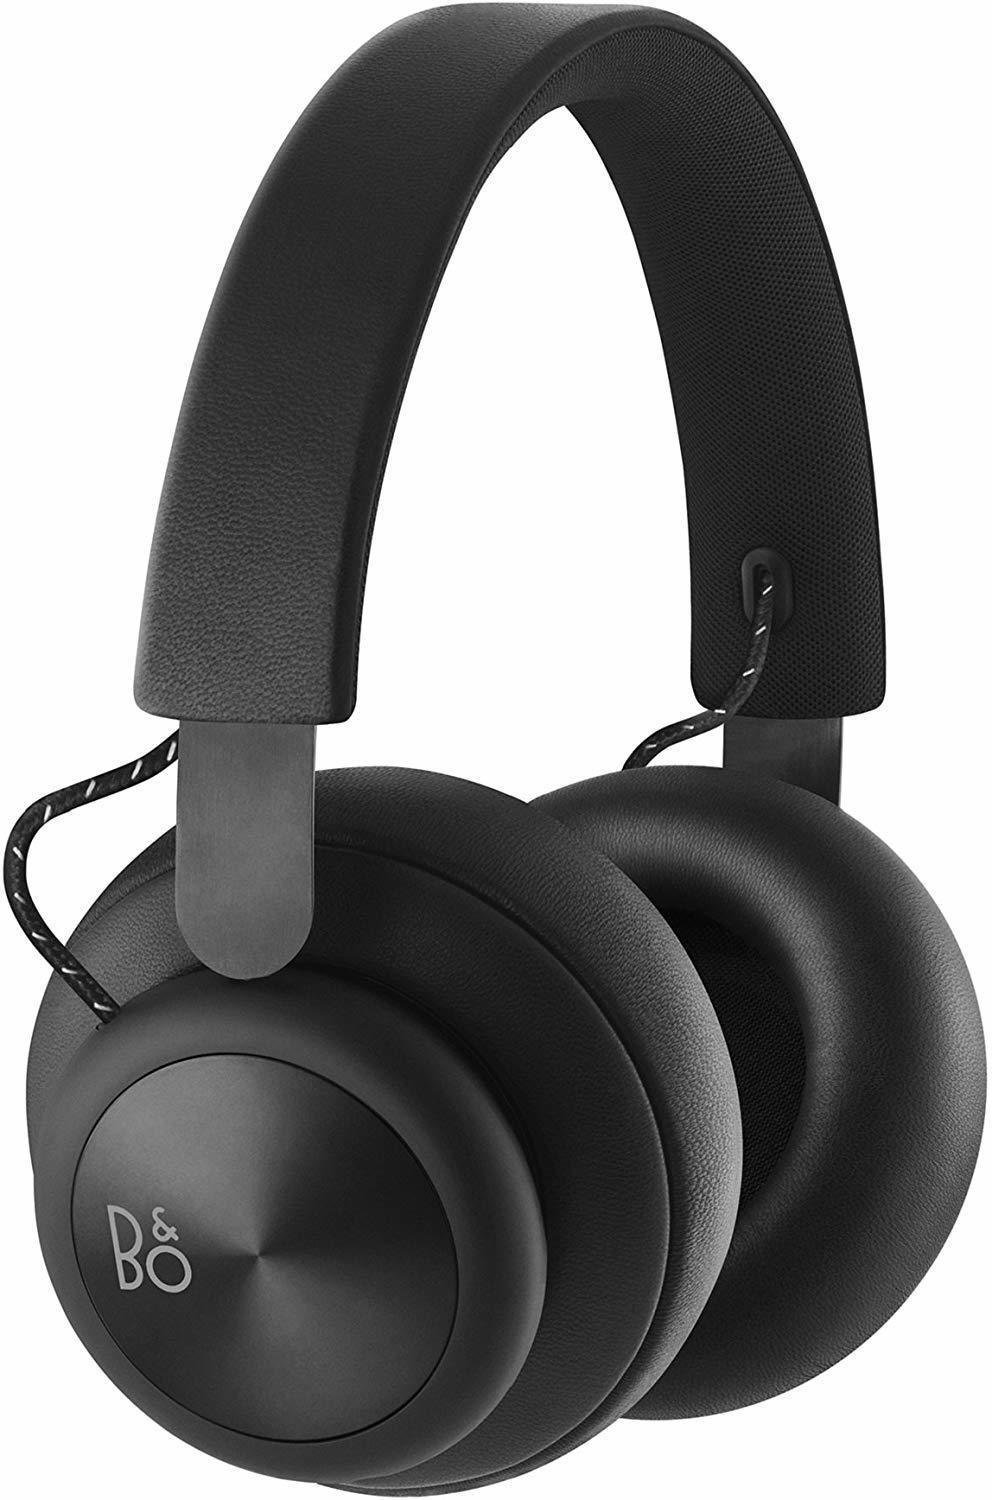 Casque sans fil supra-auriculaire Bang & Olufsen BeoPlay H4 Black